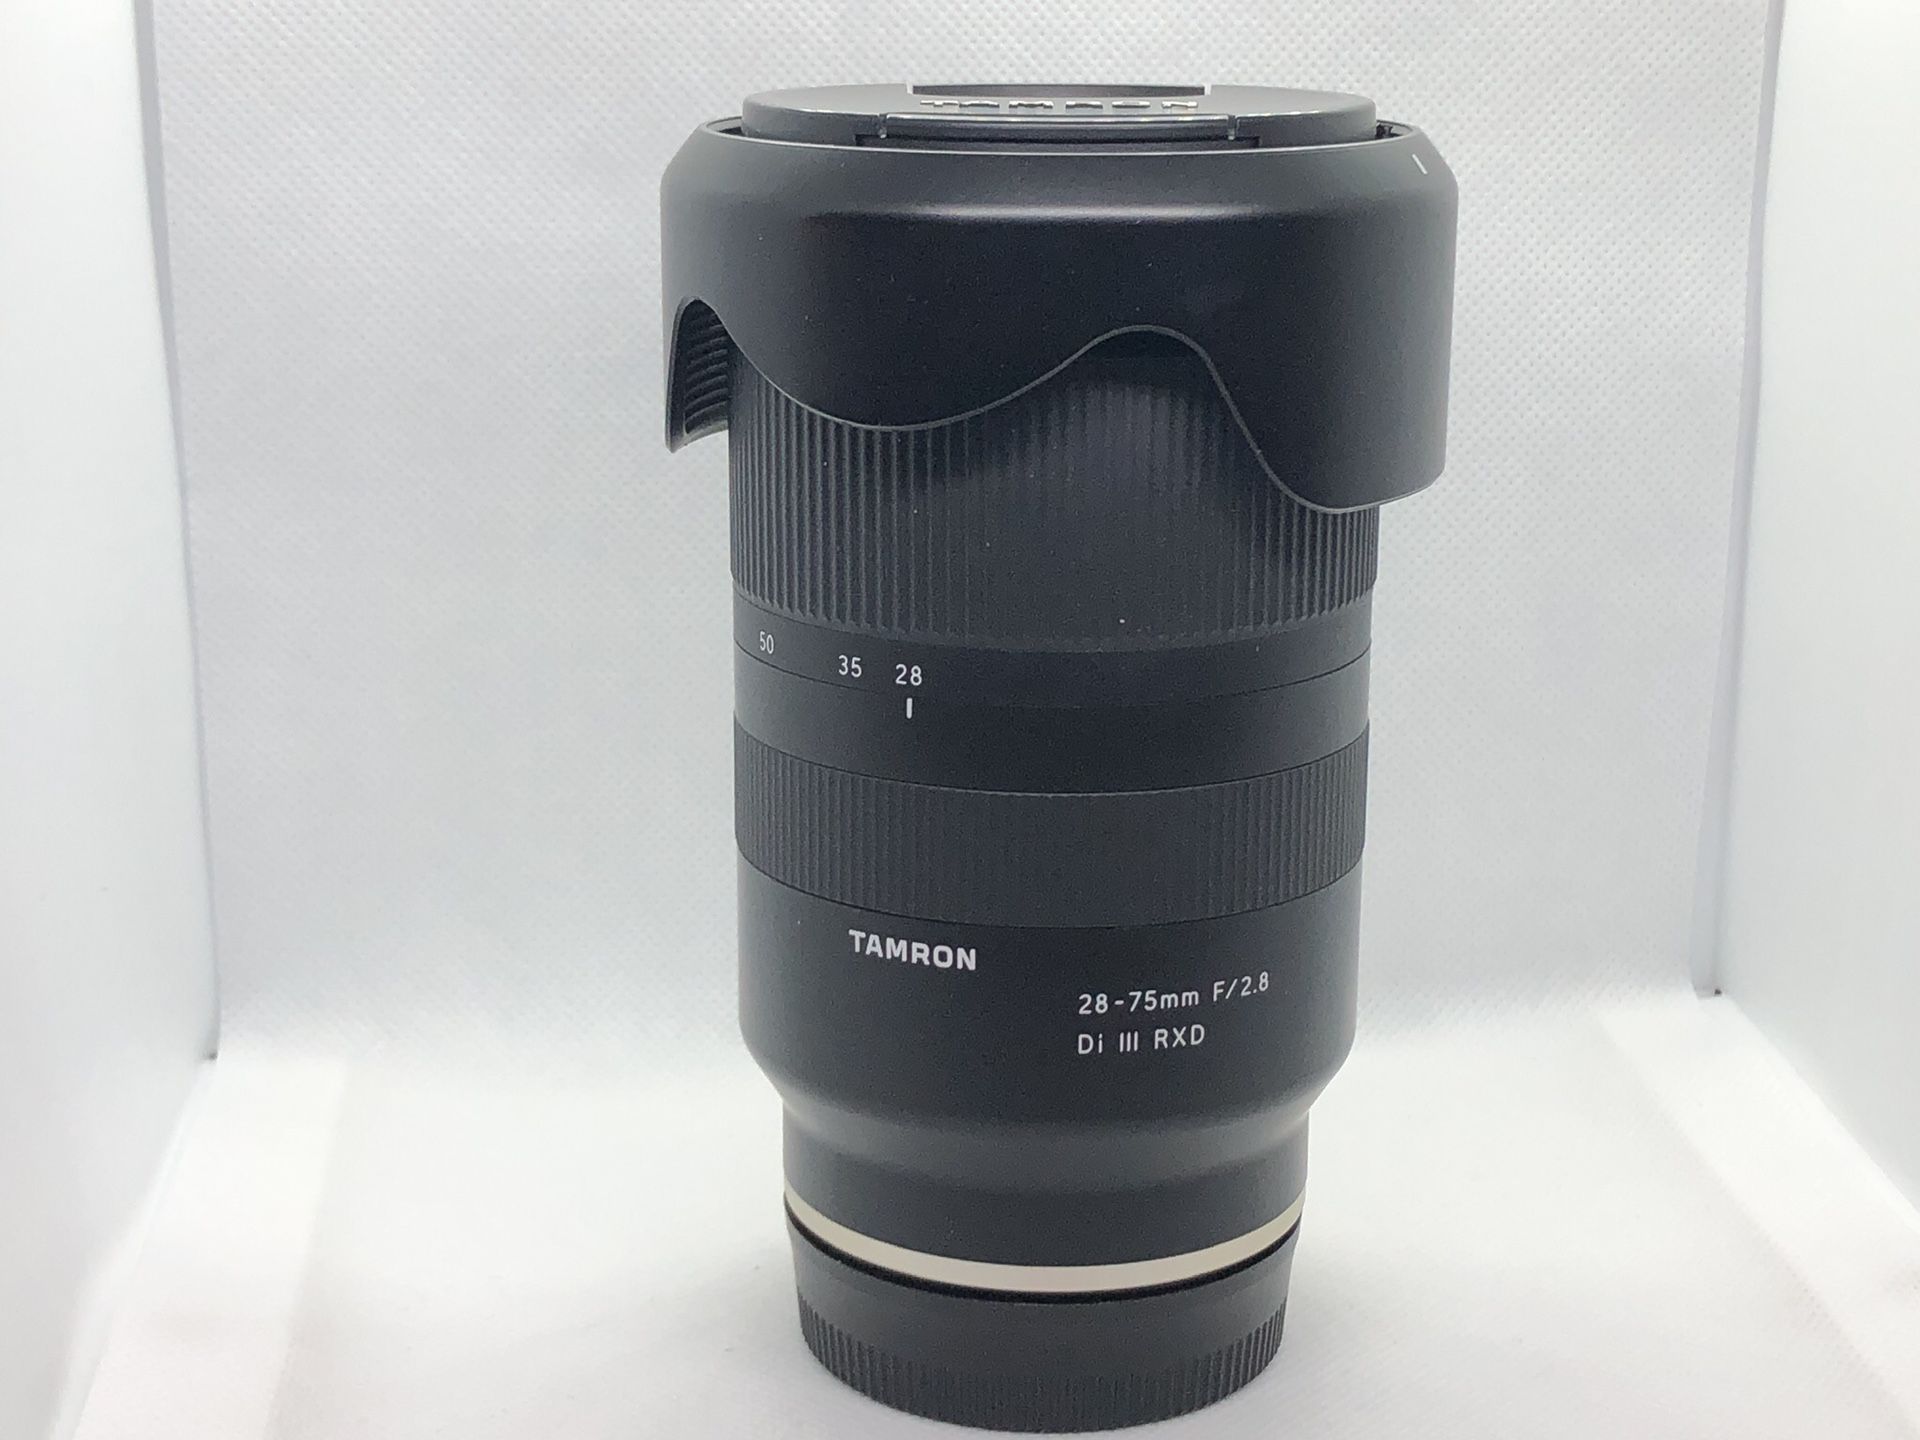 Tamron 28-75mm F/2.8 for Sony Mirrorless Full Frame E Mount (Warranty until July 2024)